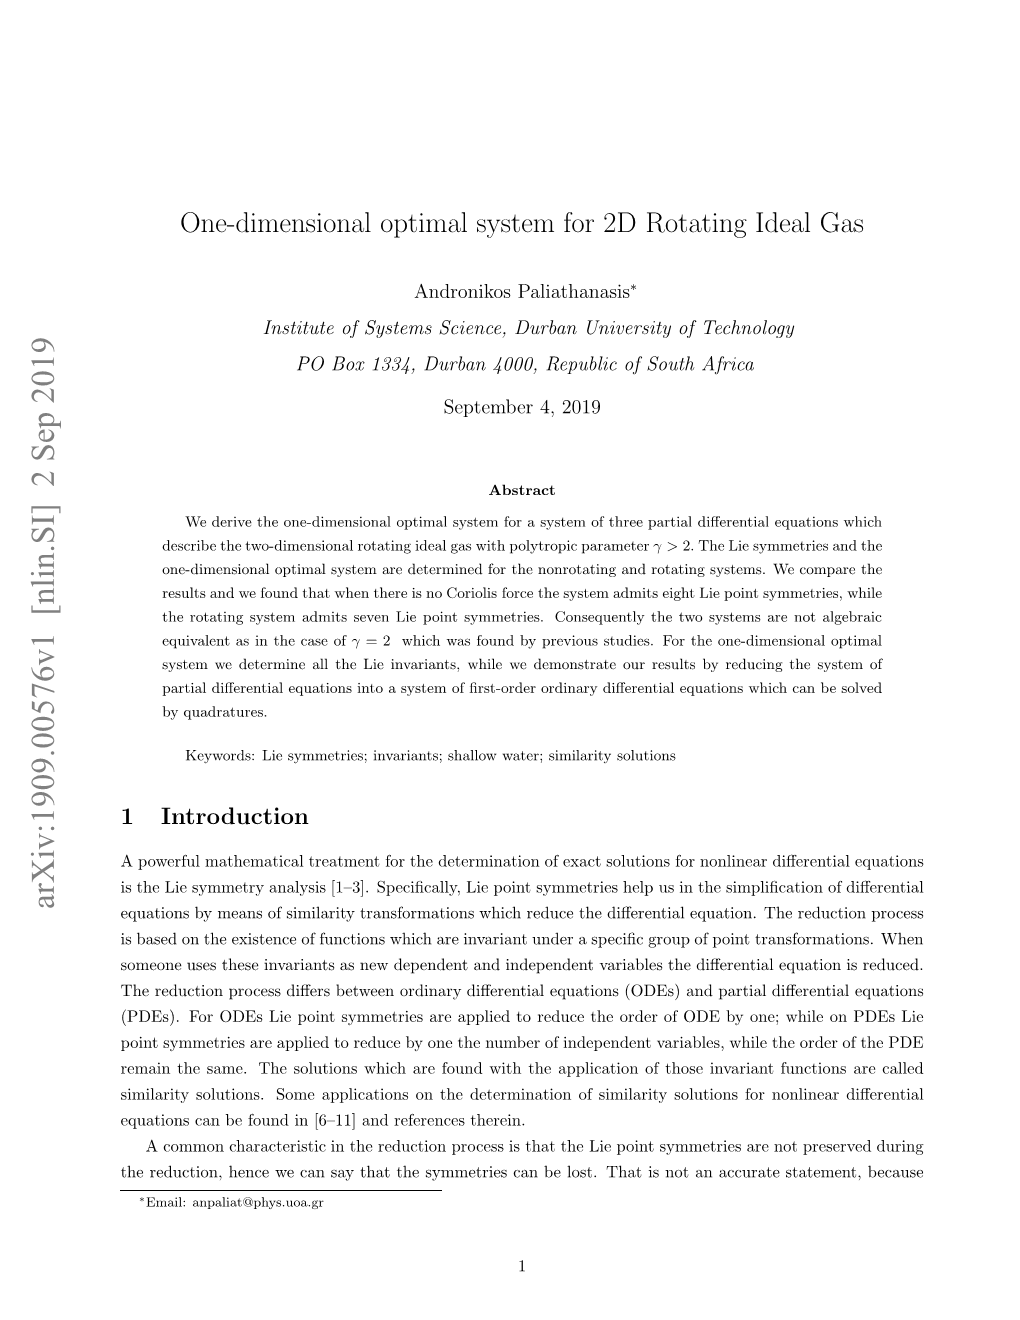 One-Dimensional Optimal System for 2D Rotating Ideal